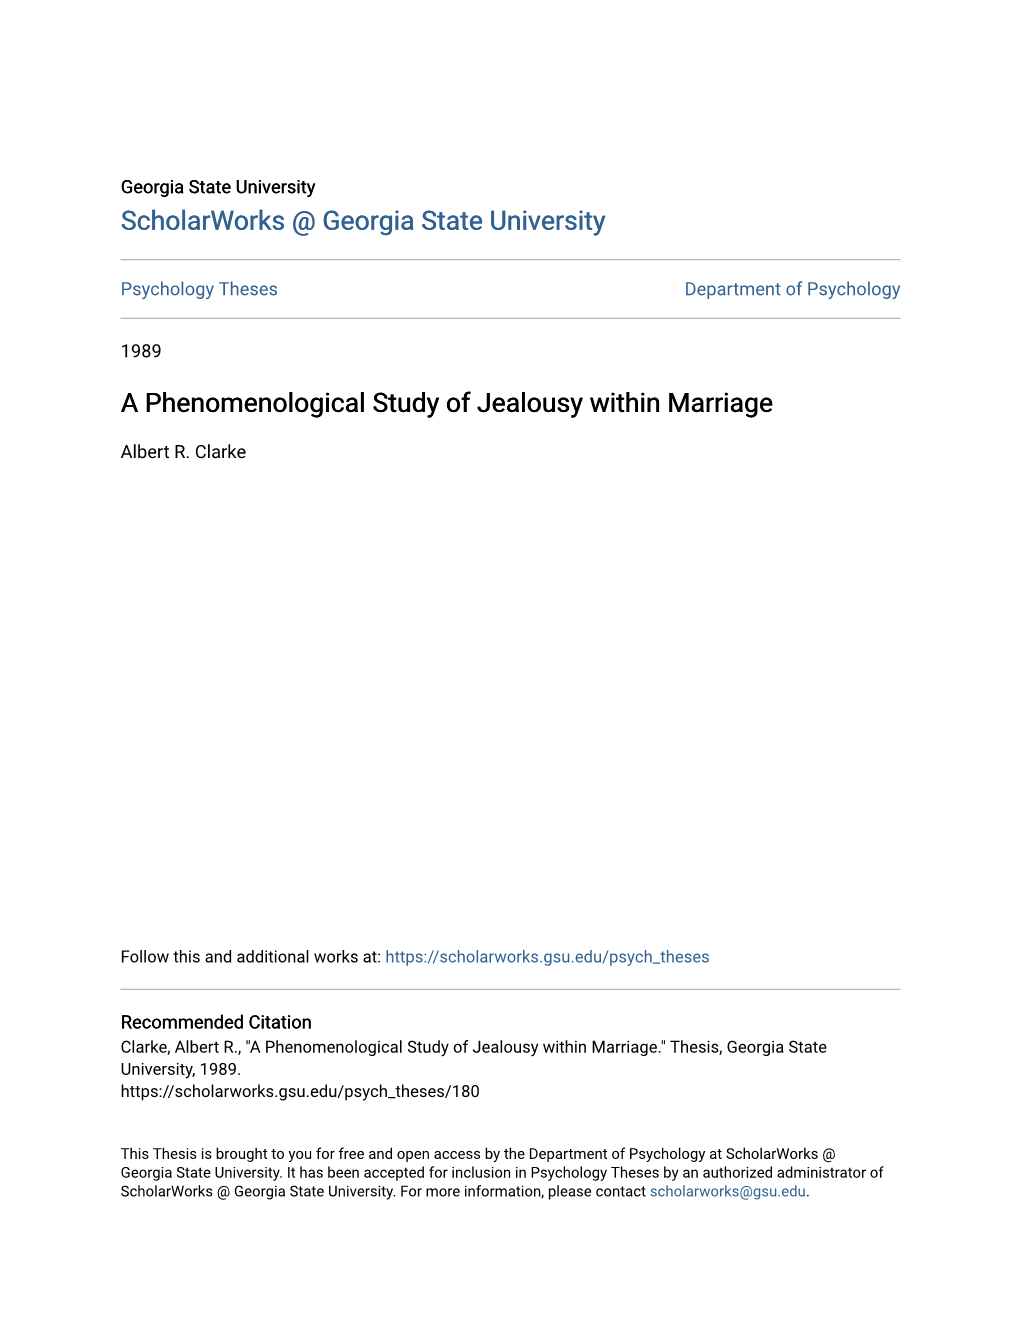 A Phenomenological Study of Jealousy Within Marriage